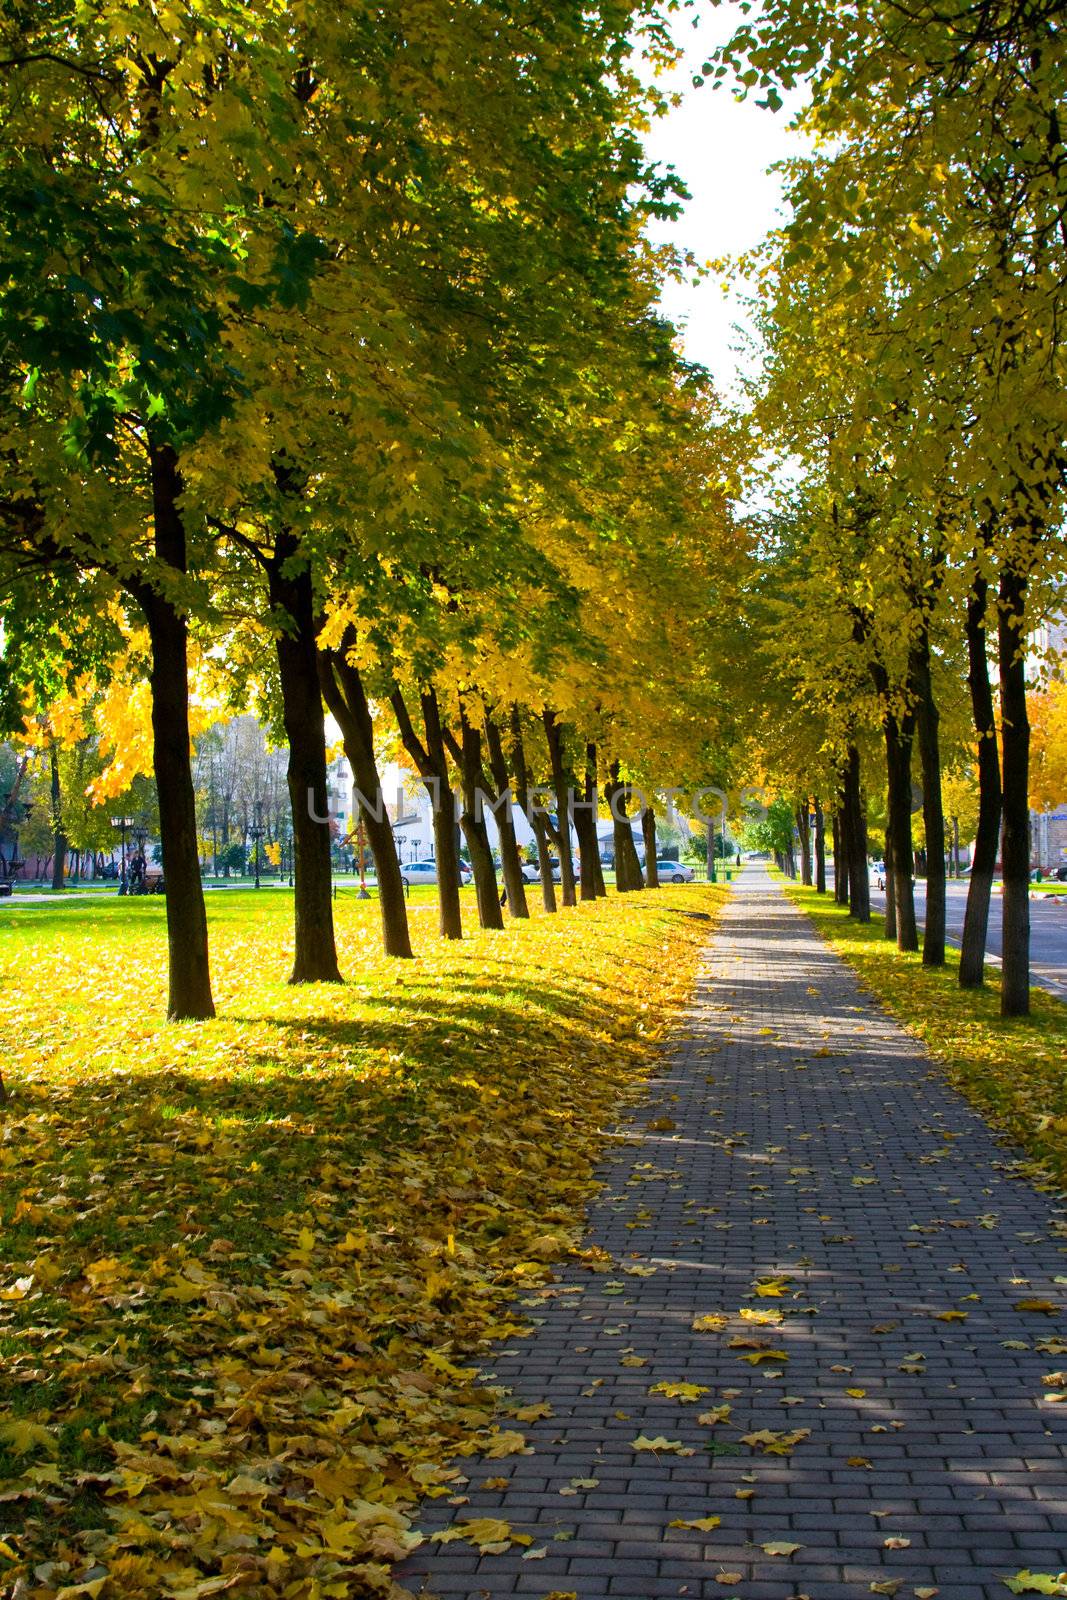 The avenue among trees is covered by leaves